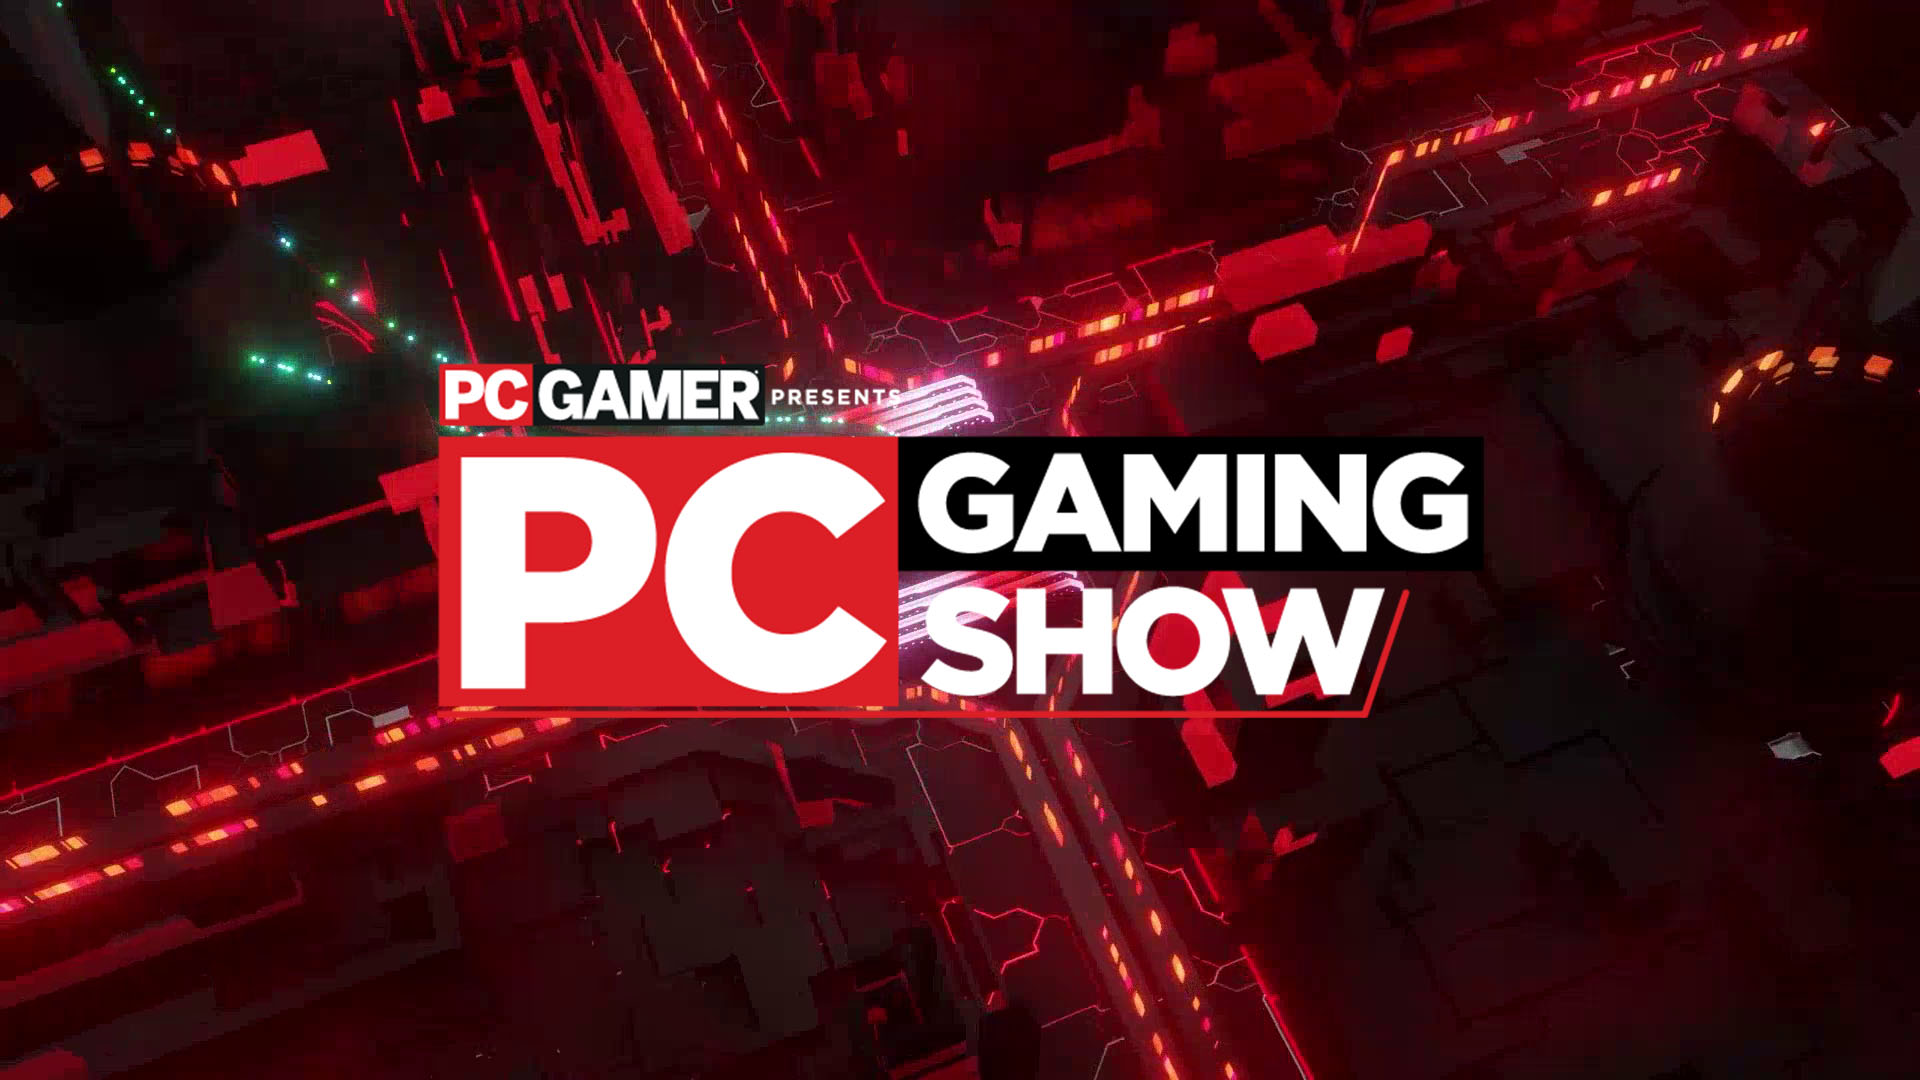 Pc gaming show 05 19 22 12